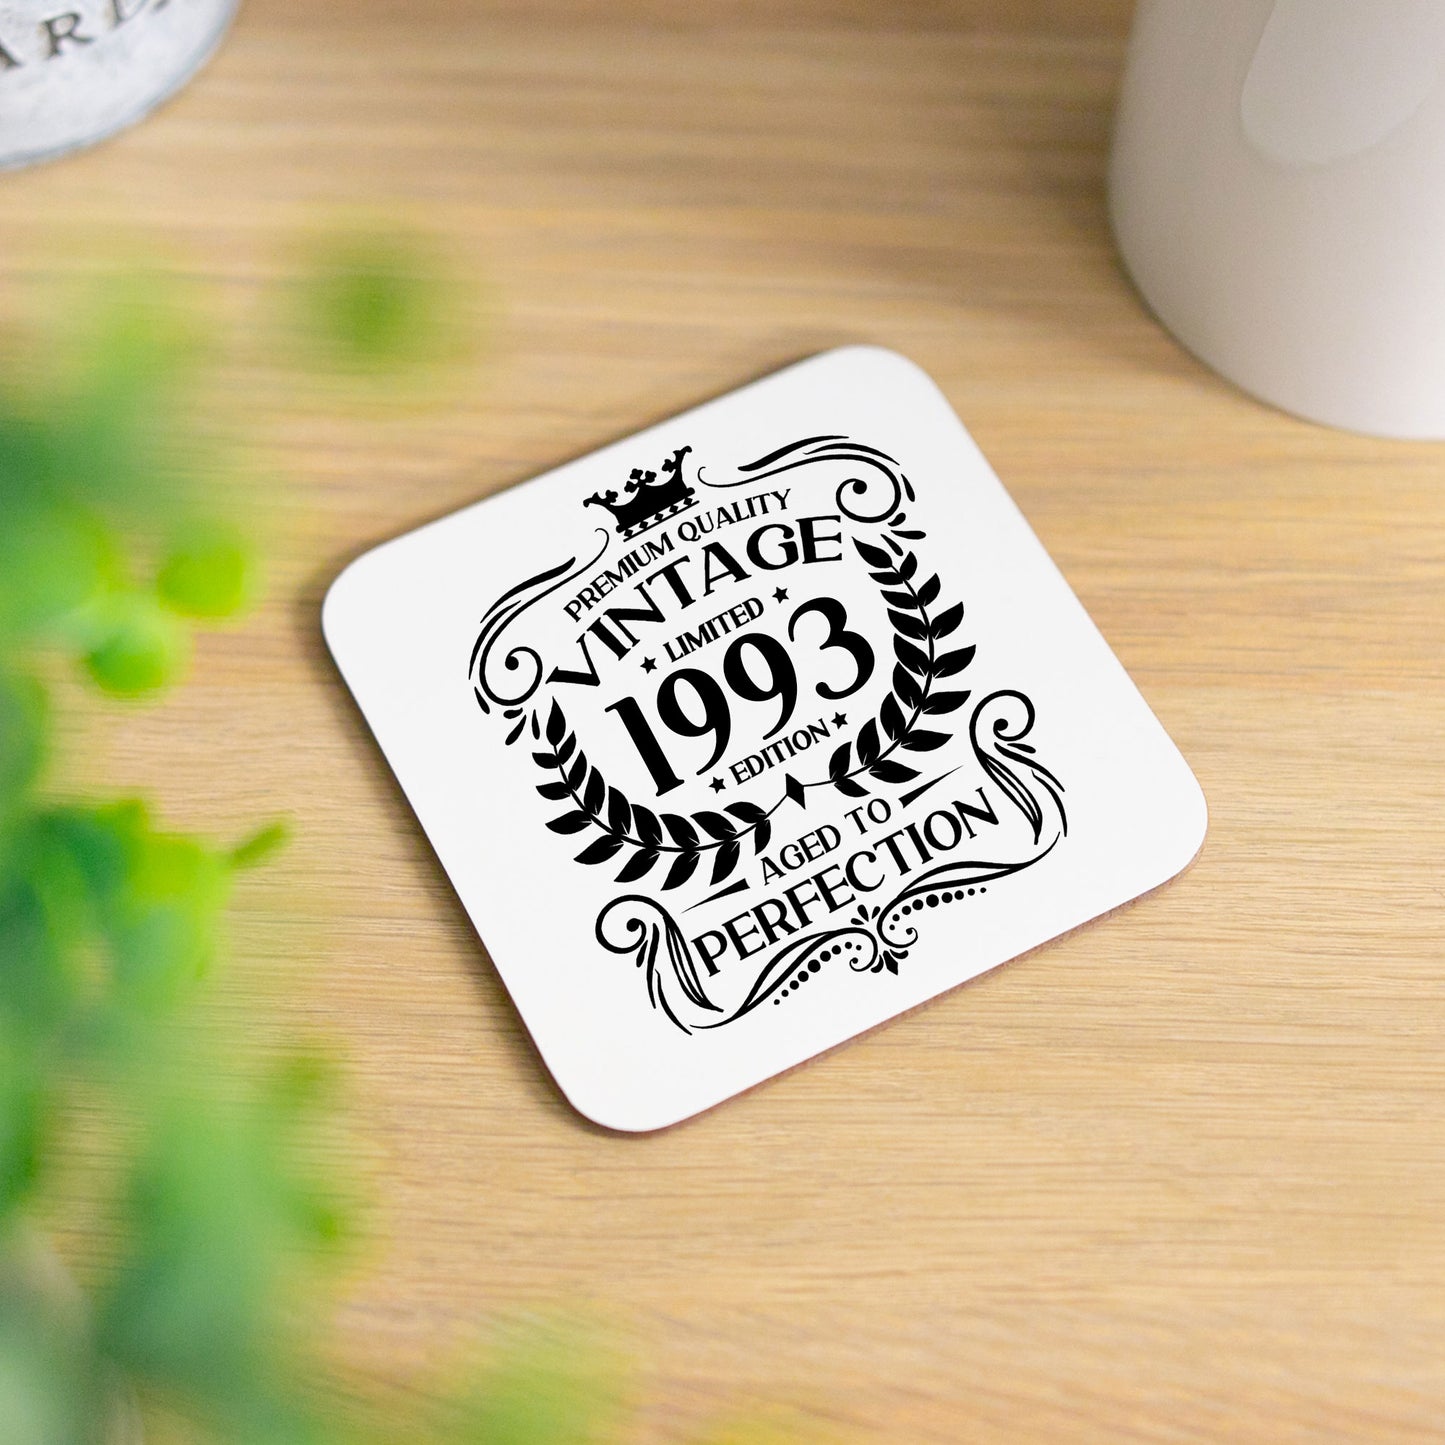 Vintage 1993 30th Birthday Engraved Wine Glass Gift  - Always Looking Good - Glass & Printed Coaster  